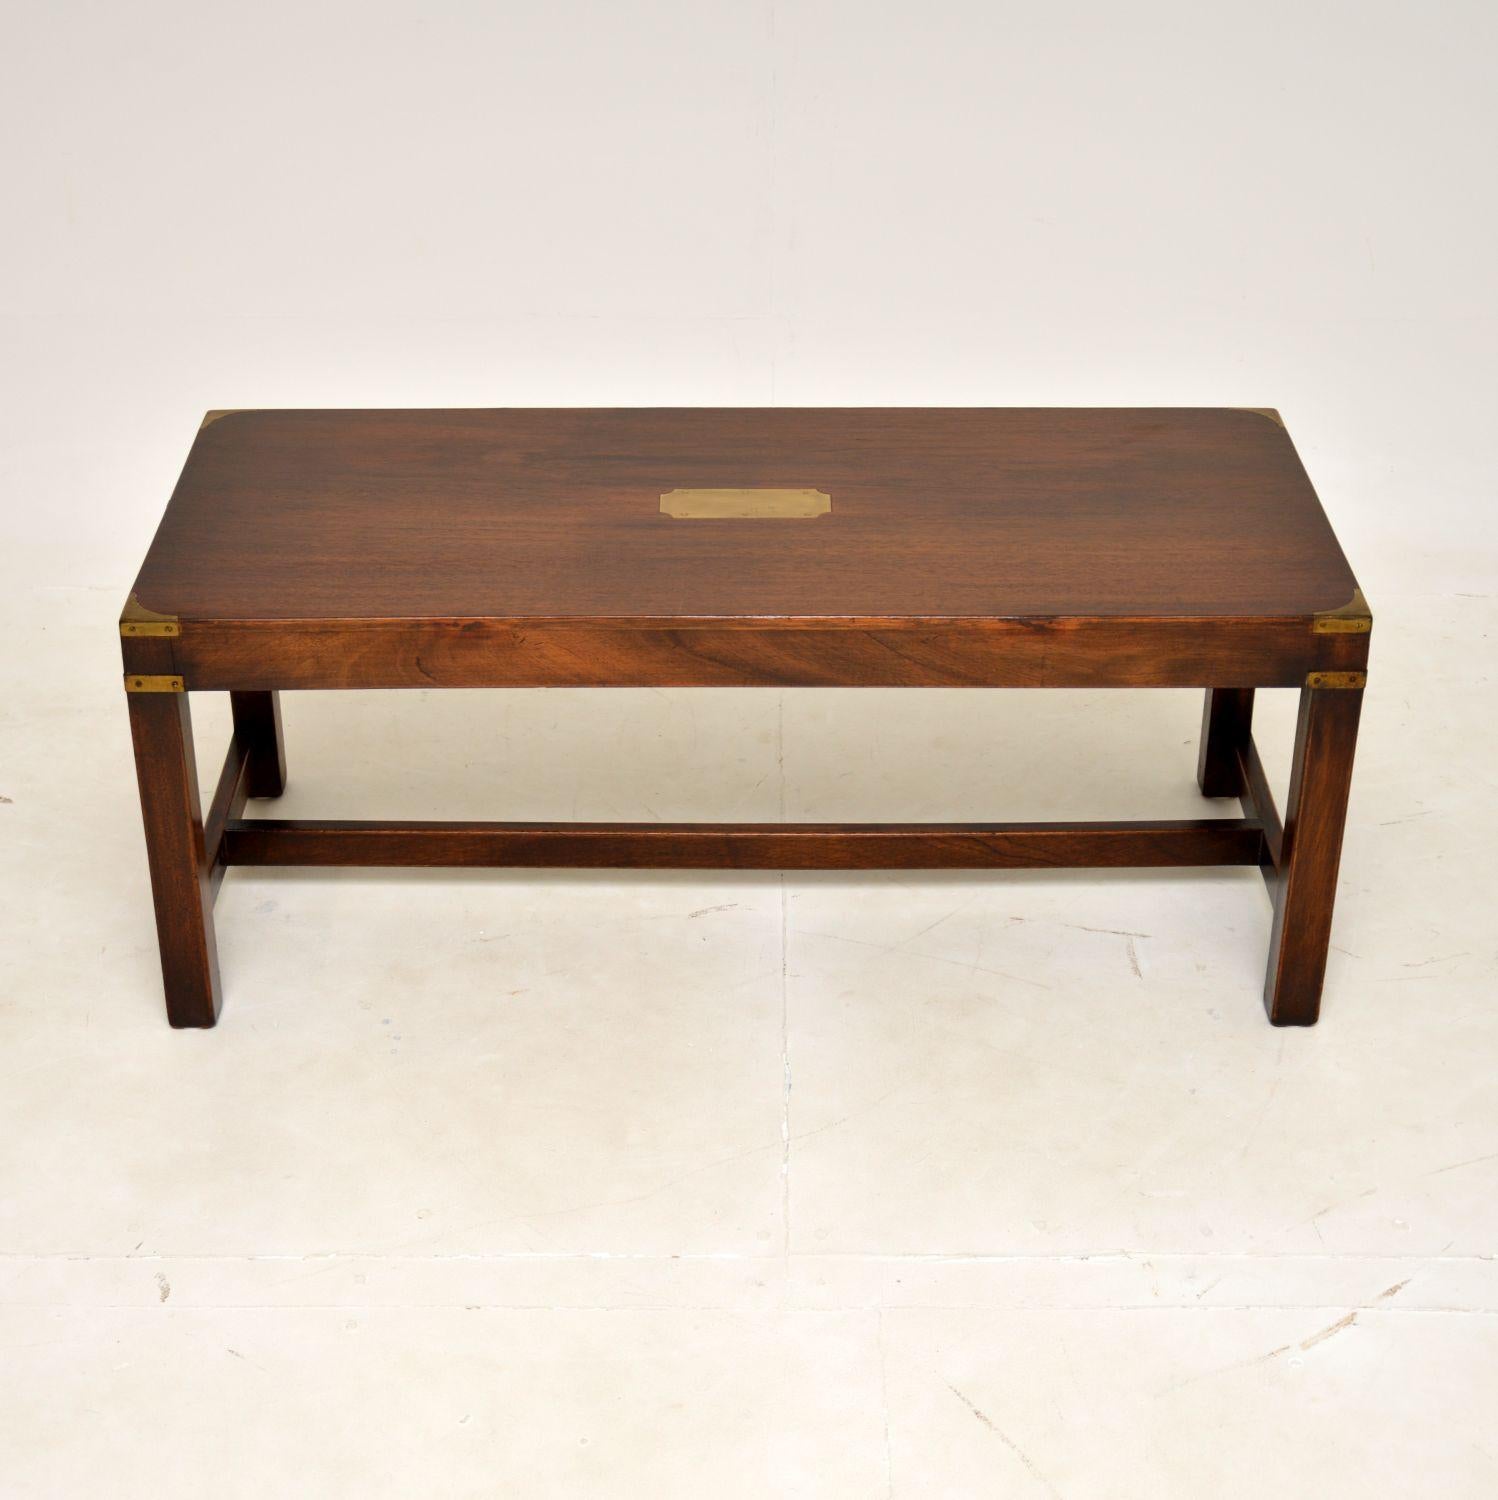 A superb antique coffee table in the military campaign style. This was made in England, it dates from around the 1930’s.

The quality is outstanding, this is very well built and has a very smart design. The wood has a beautiful colour tone, it is